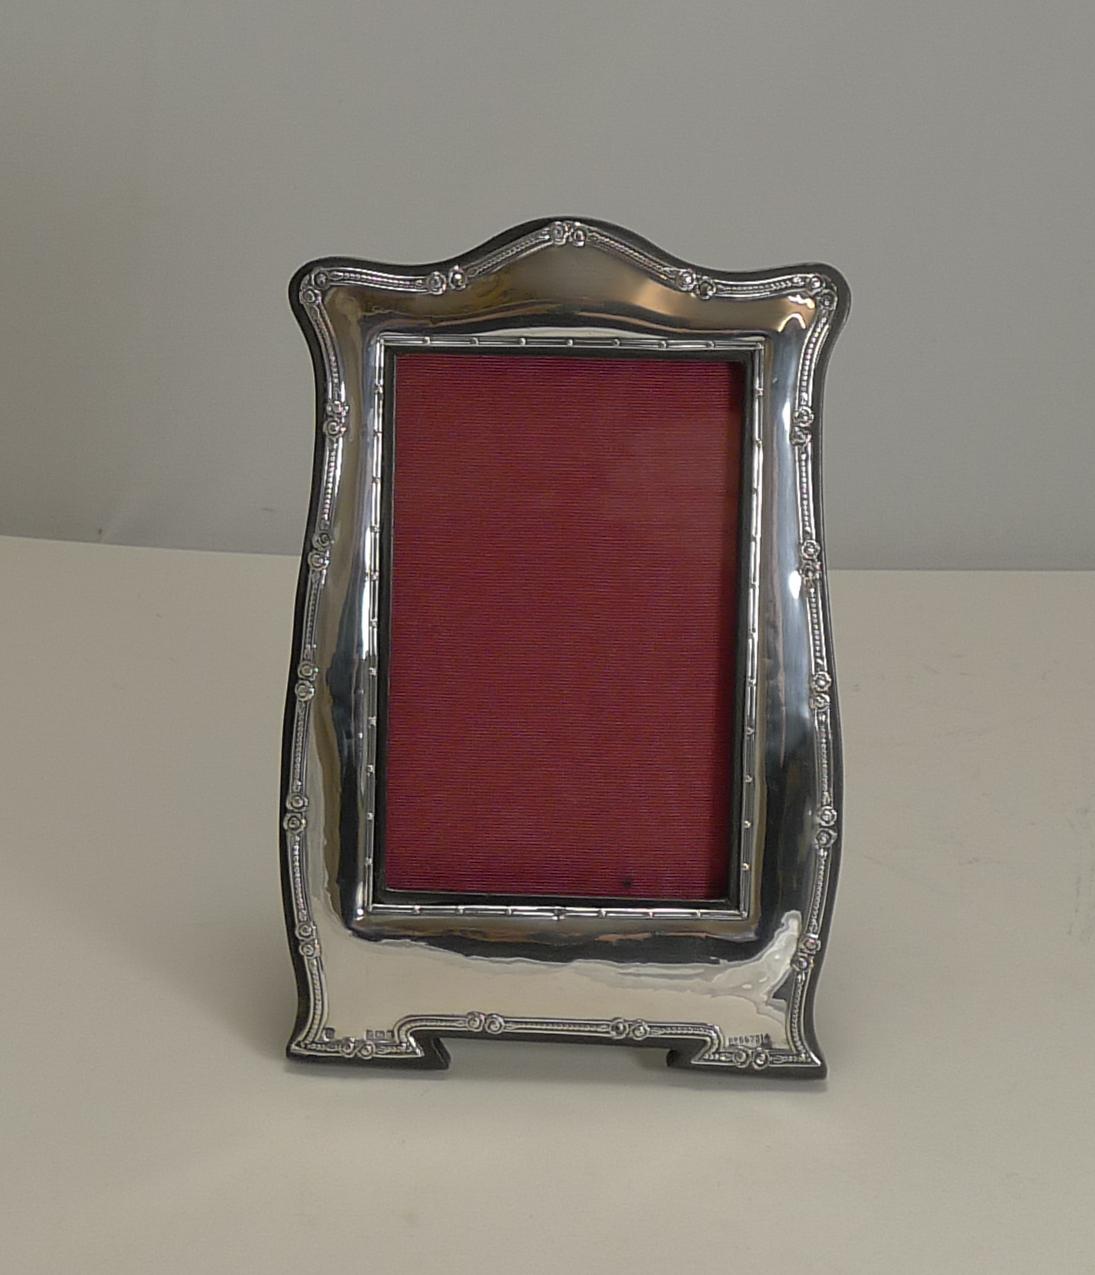 Early 20th Century Antique English Art Nouveau Photograph Frame in Sterling Silver